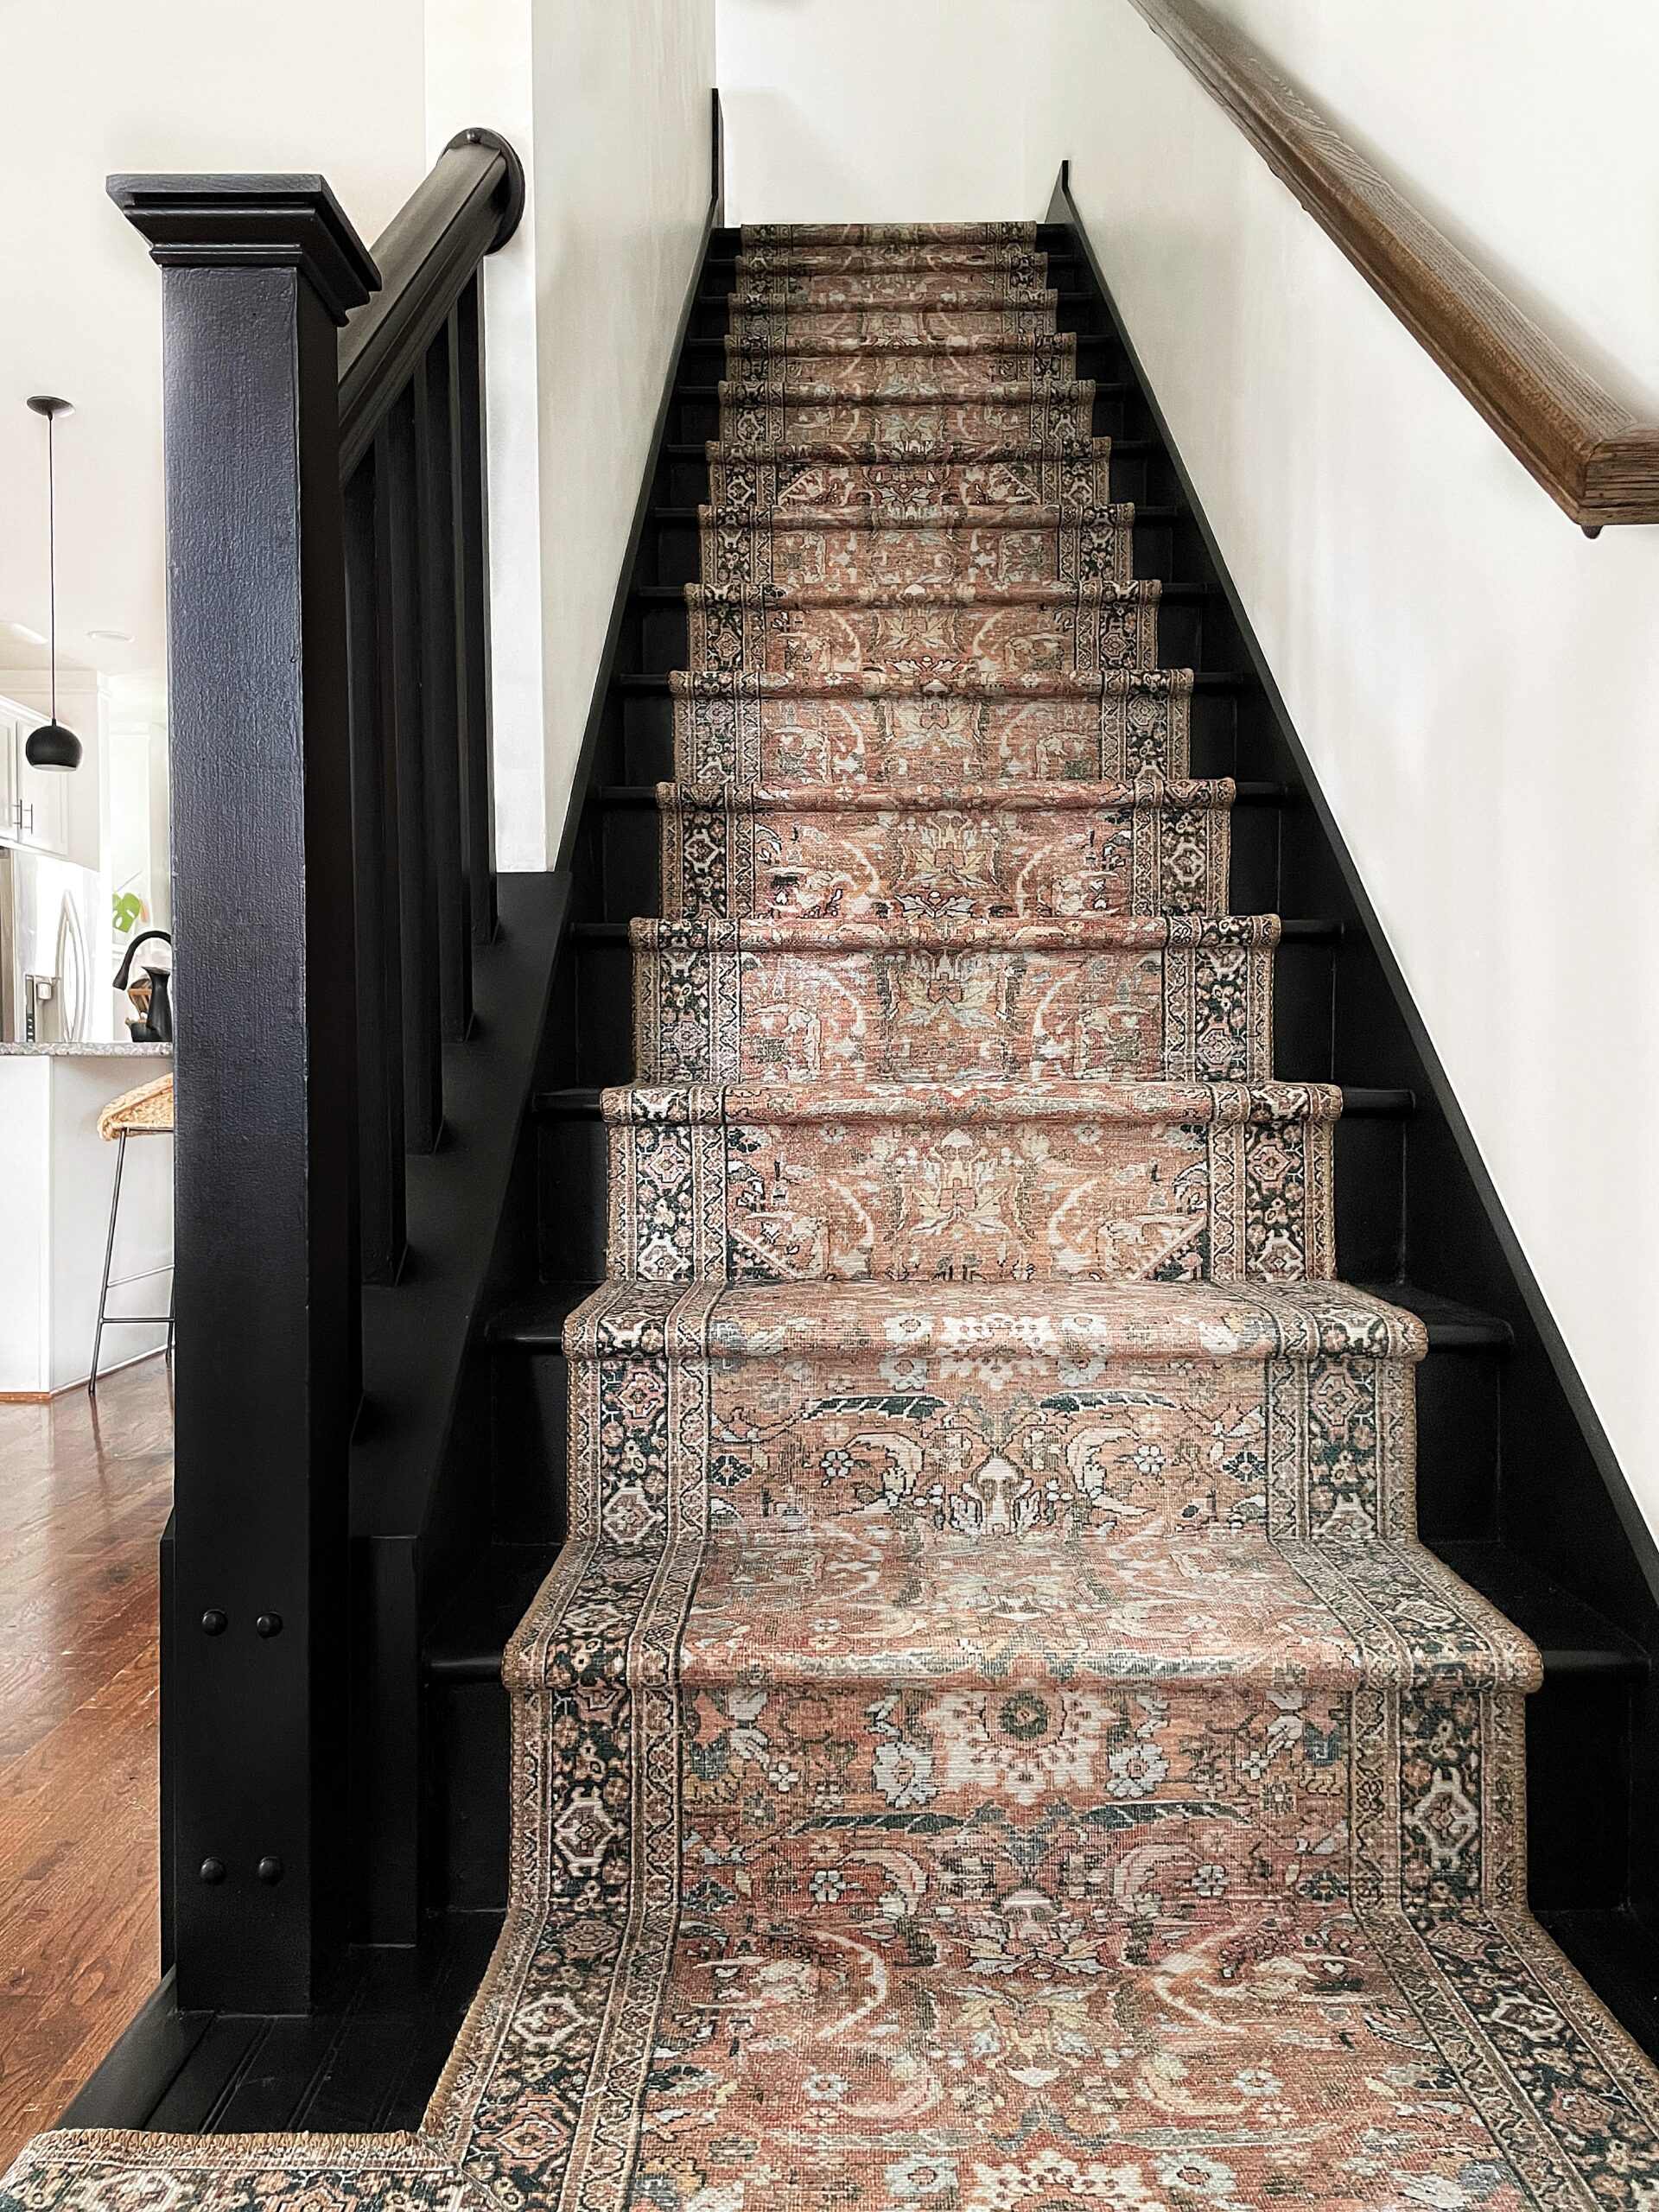 DIY stair runner install with black painted stairs and a vintage runner